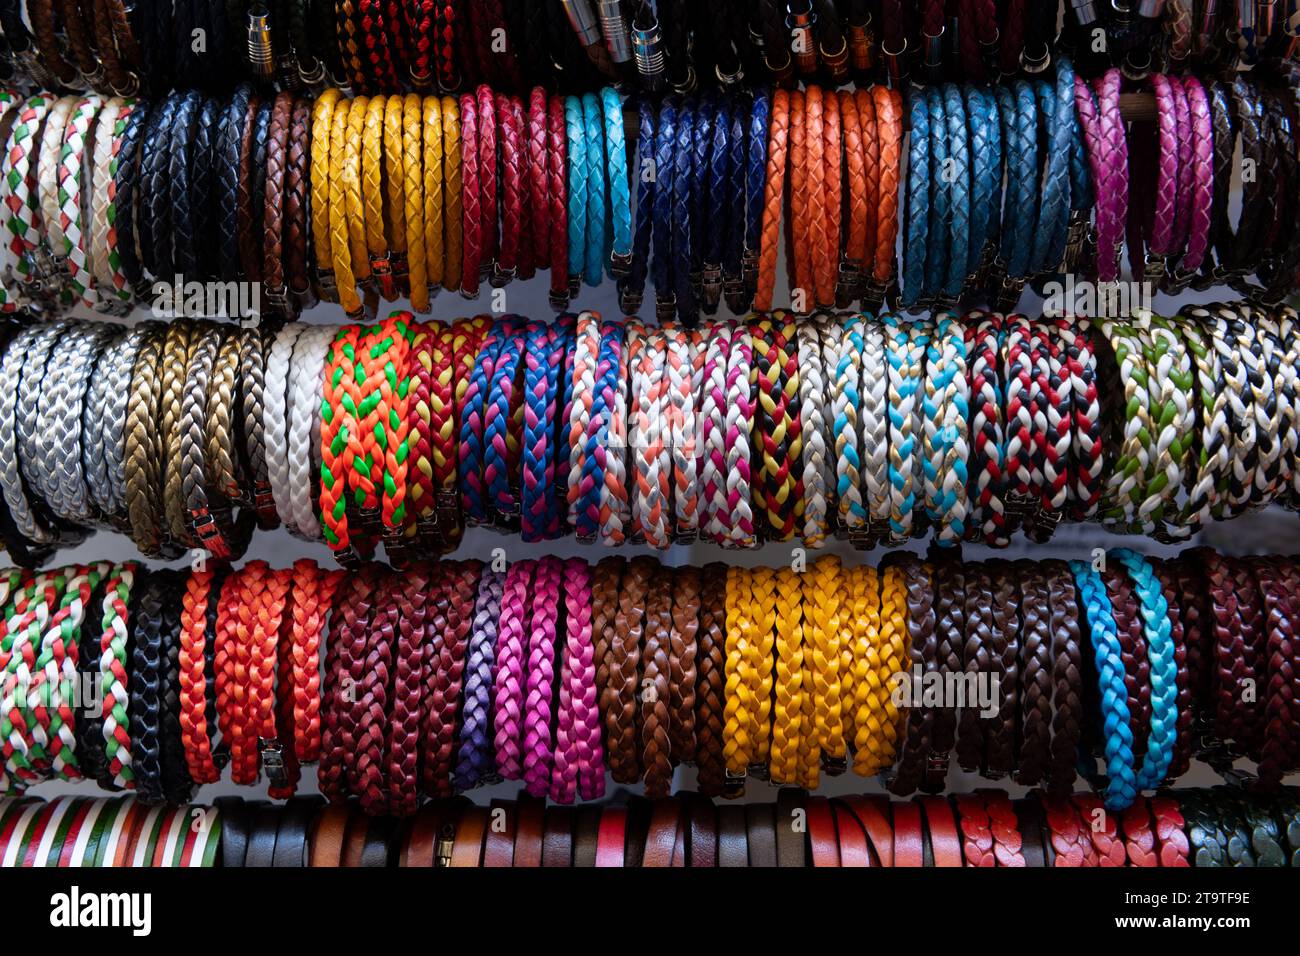 A variety of colorful, braided Italian leather bracelets displayed at an outdoor market in Florence, Italy. Stock Photo